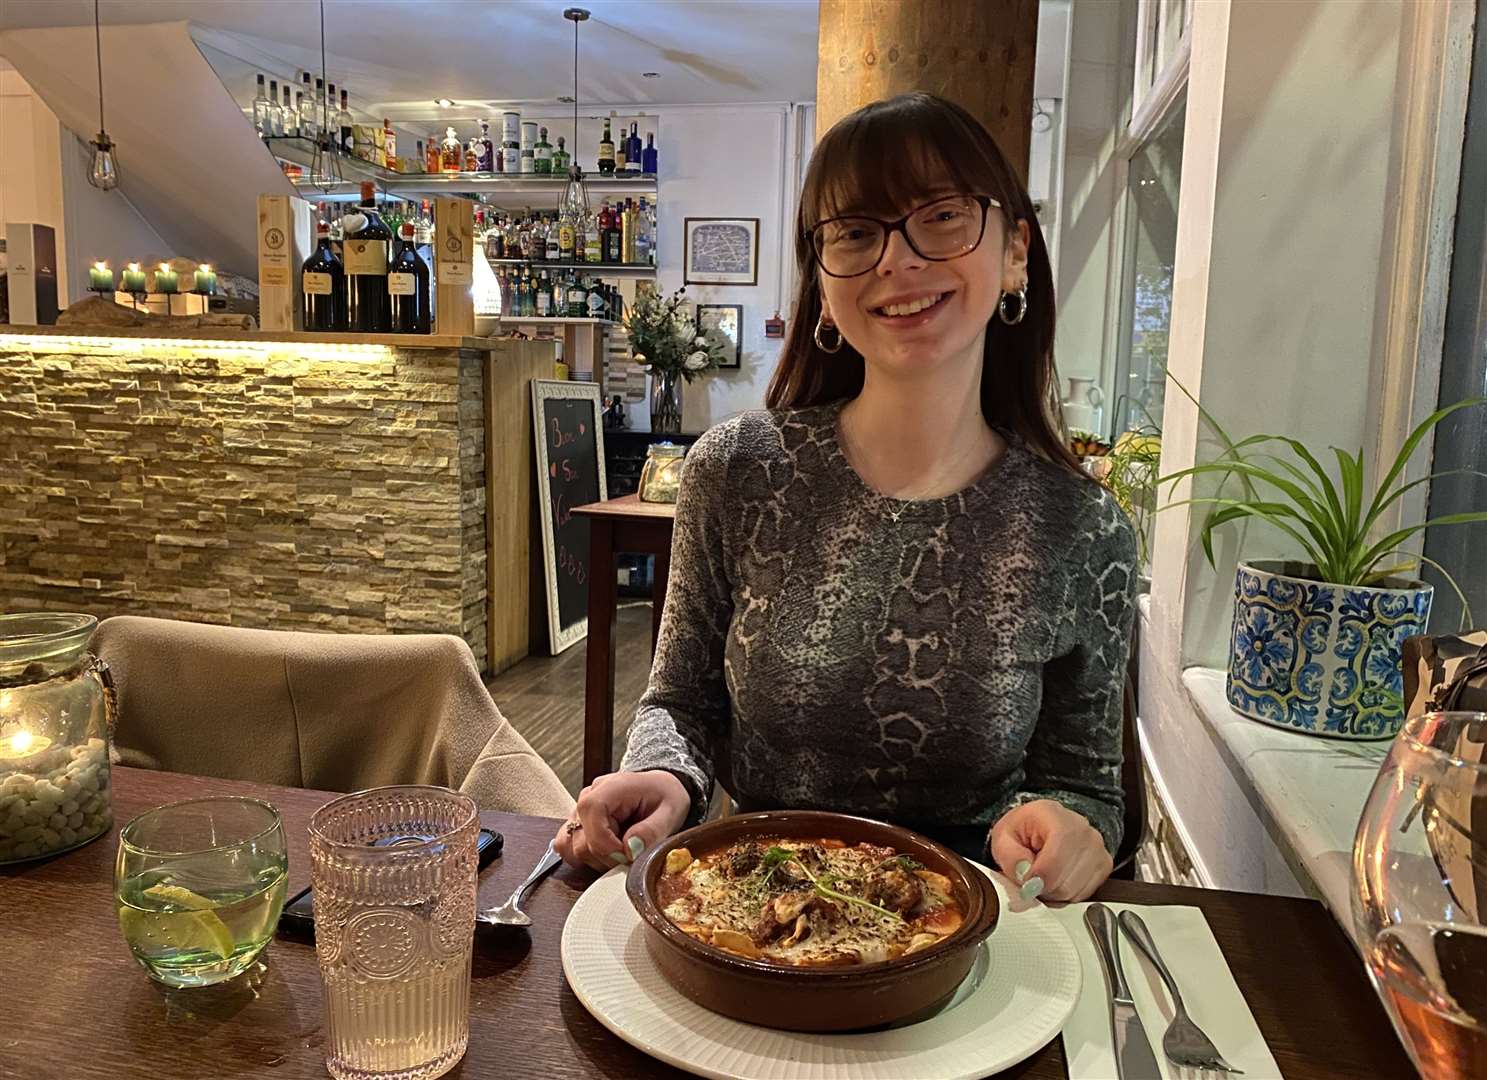 Our reporter Cara Simmonds sat down for a meal at La Villetta